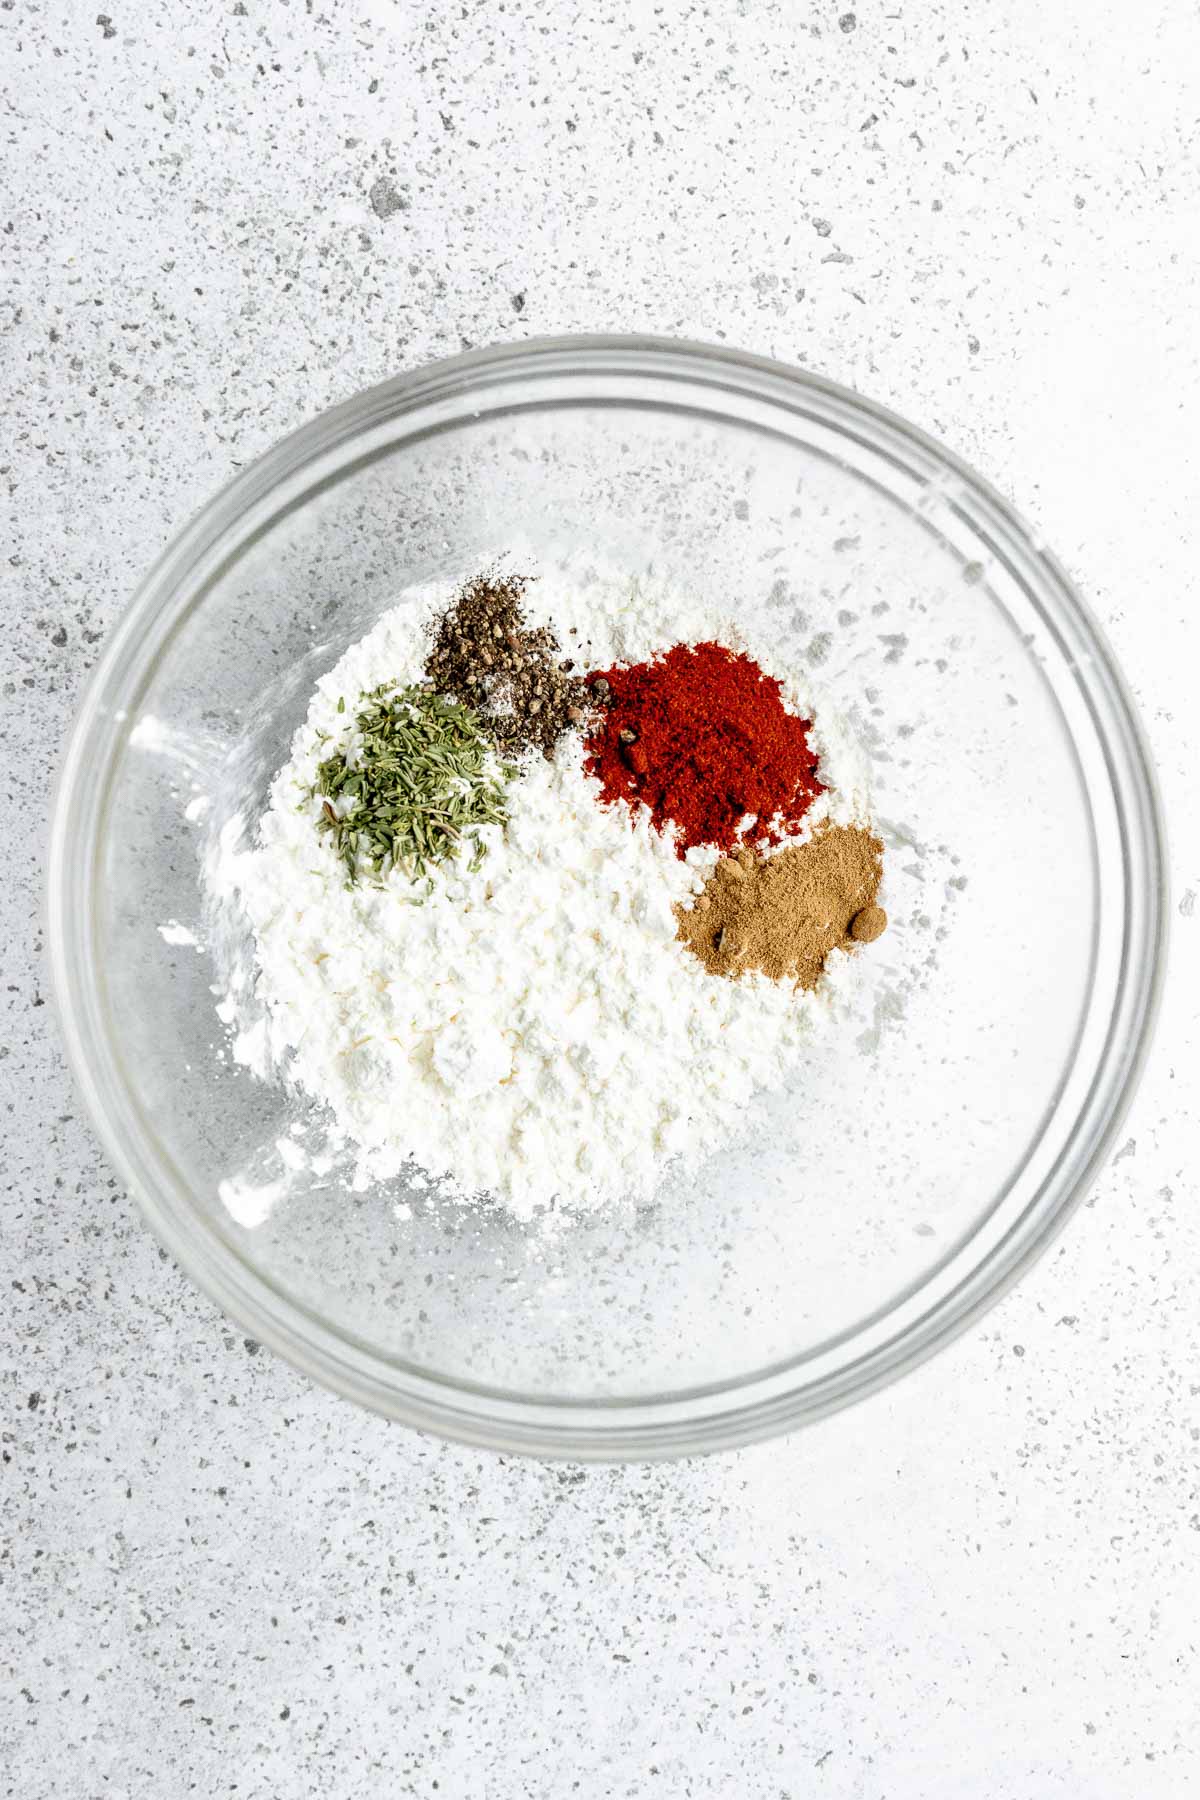 A glass bowl with spices and seasonings on a white surface.